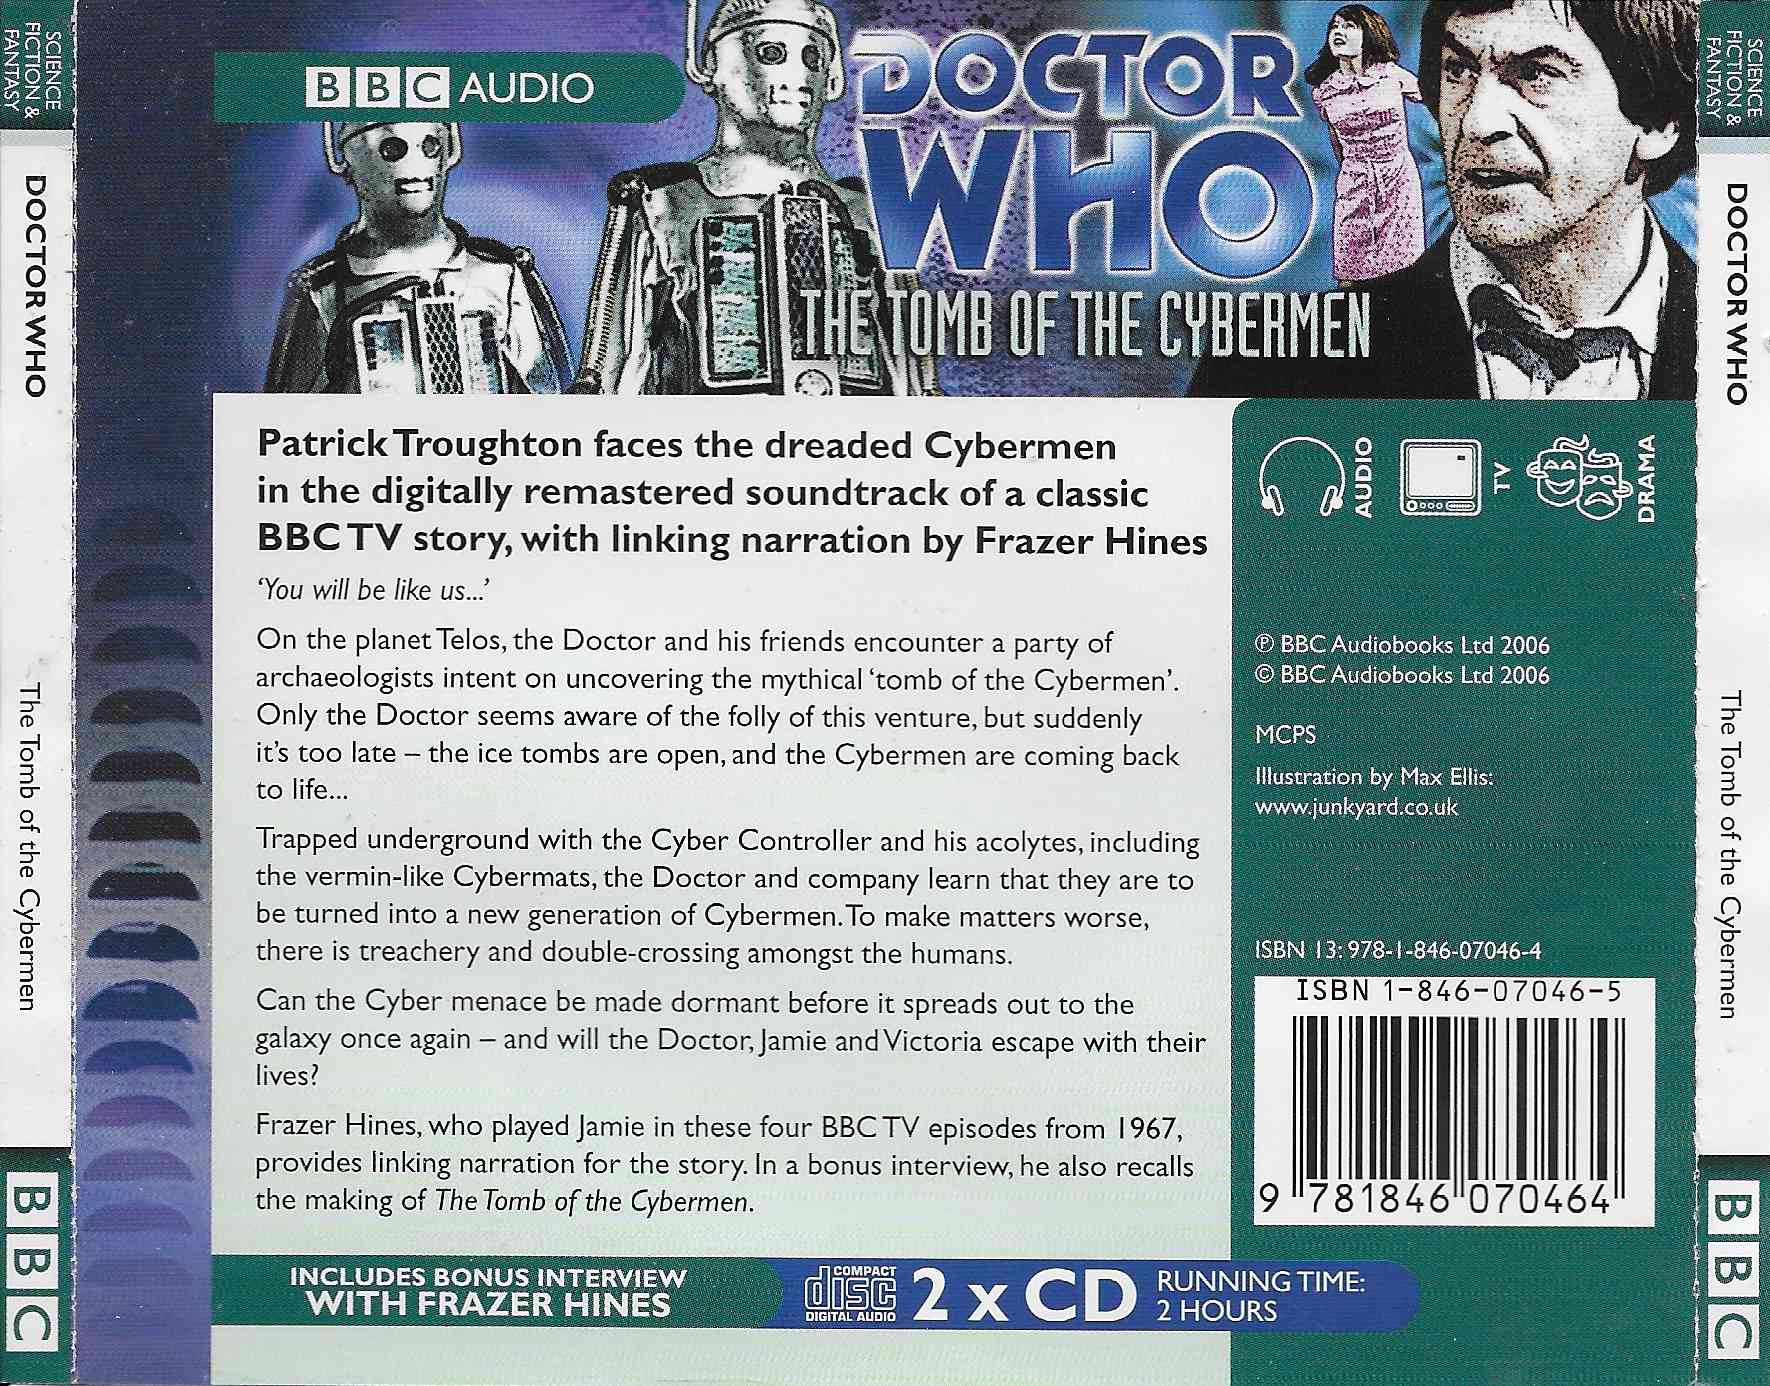 Picture of ISBN 1-856-07046-5 Doctor Who - The tomb of the Cybermen by artist Kit Peddler / Gerry Davis from the BBC records and Tapes library